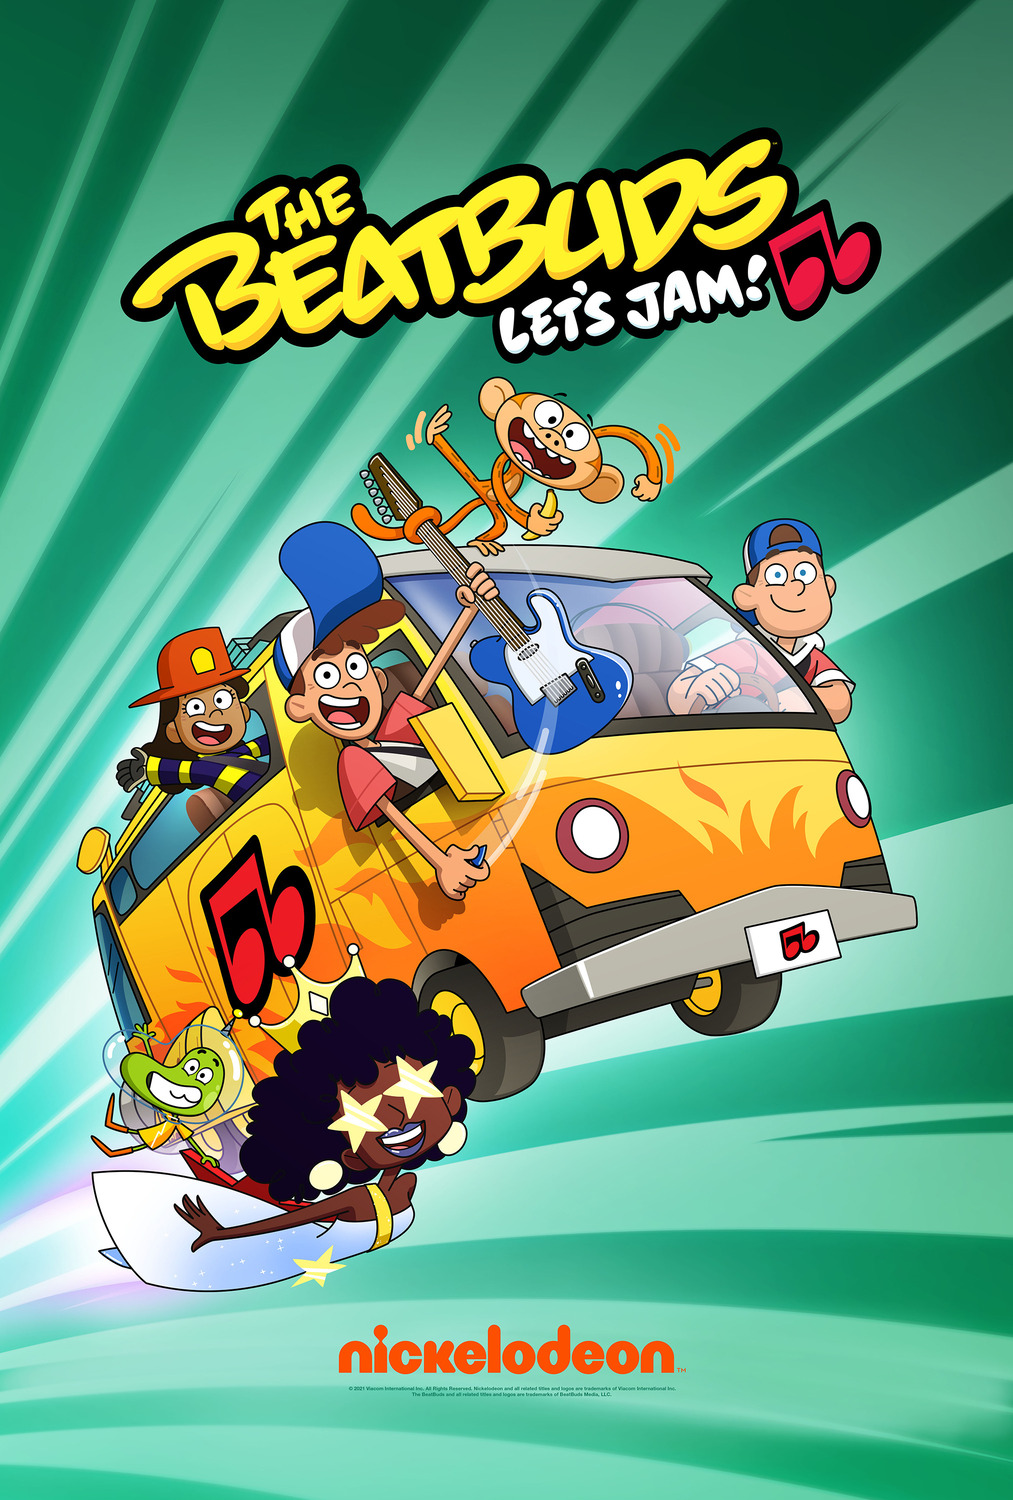 Extra Large TV Poster Image for The BeatBuds: Let's Jam! 